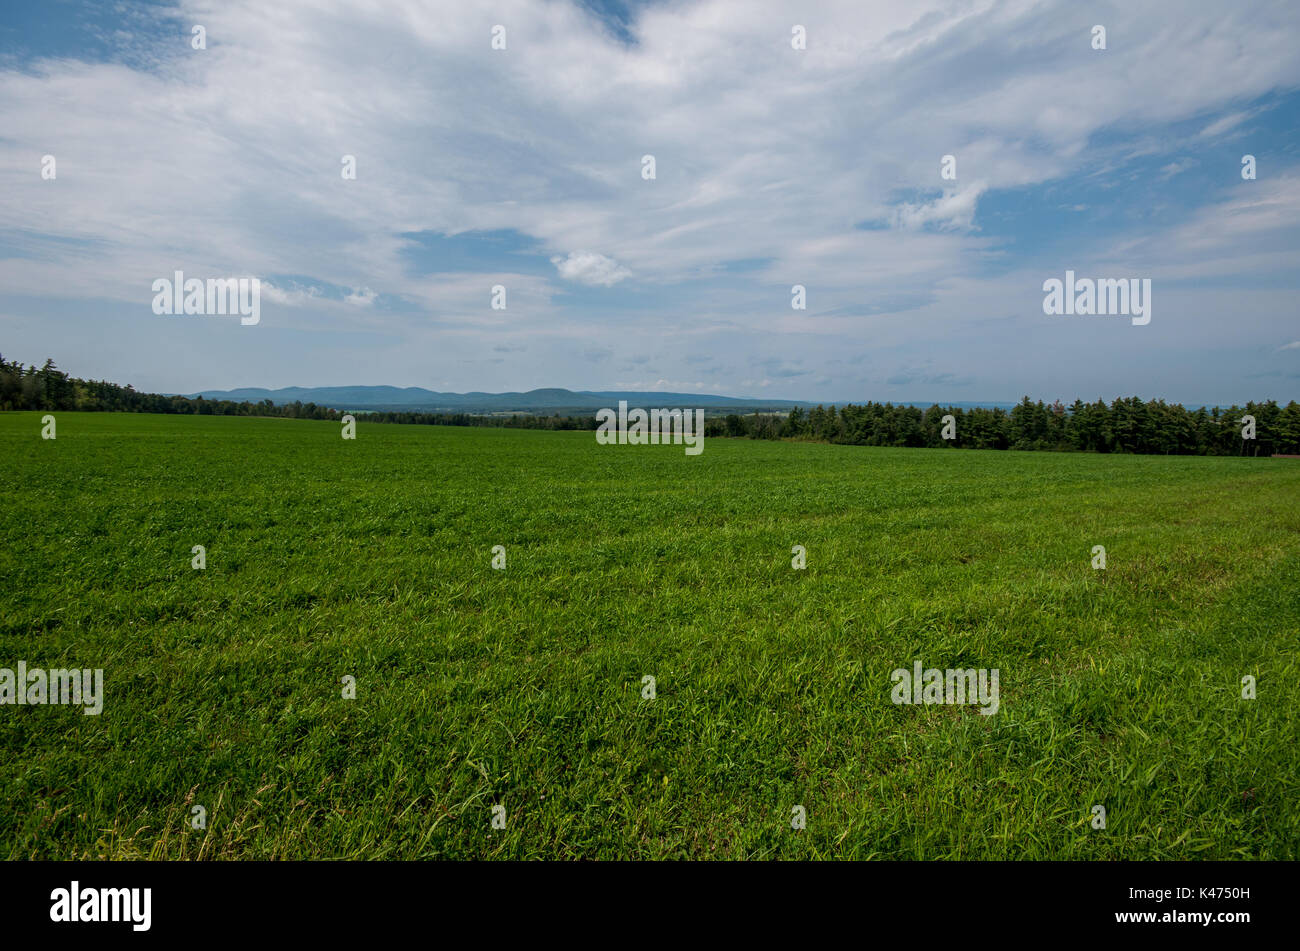 Large field with mountains in the background Stock Photo